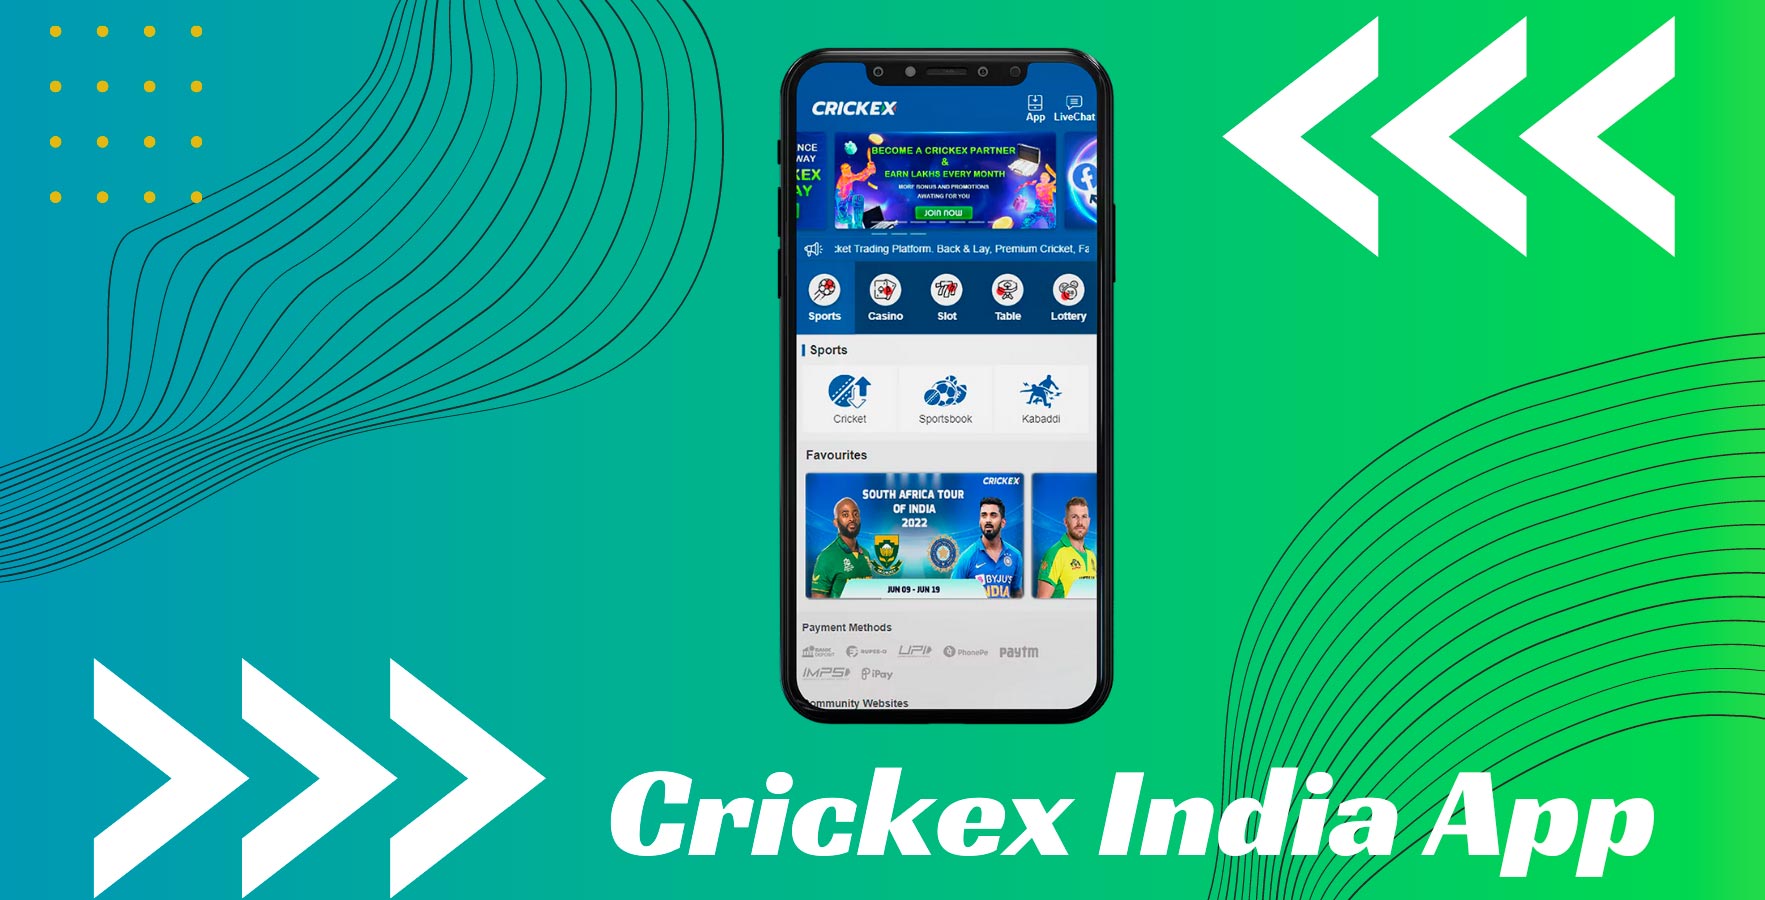 The Crickex app is exclusively available for Android phones.